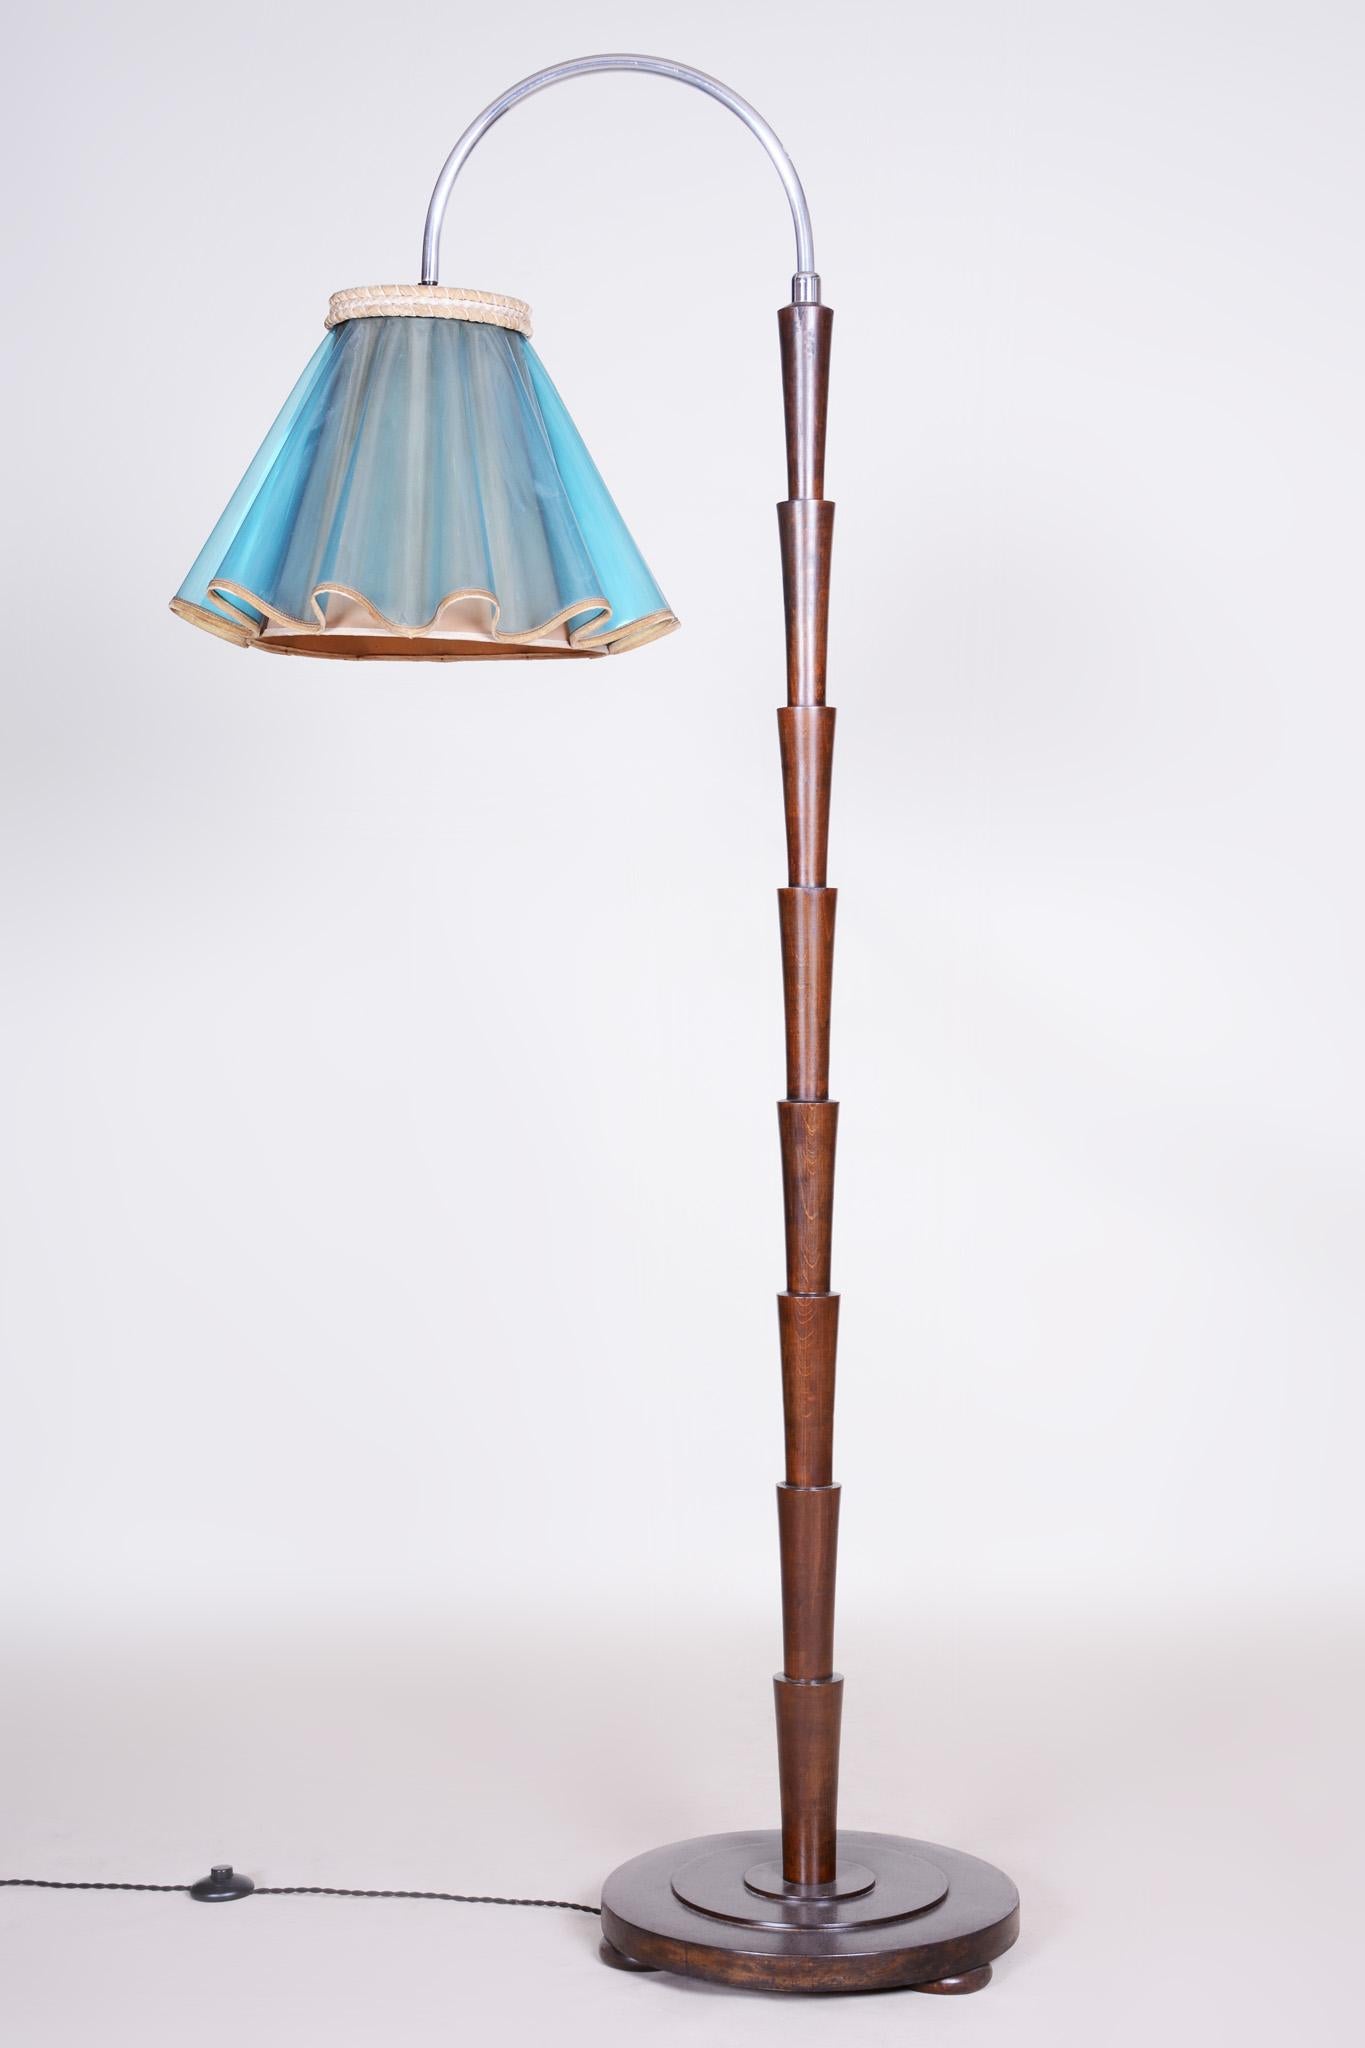 Restored Czech Cubism Beech Chrome Floor Lamp, 1920s In Good Condition For Sale In Horomerice, CZ